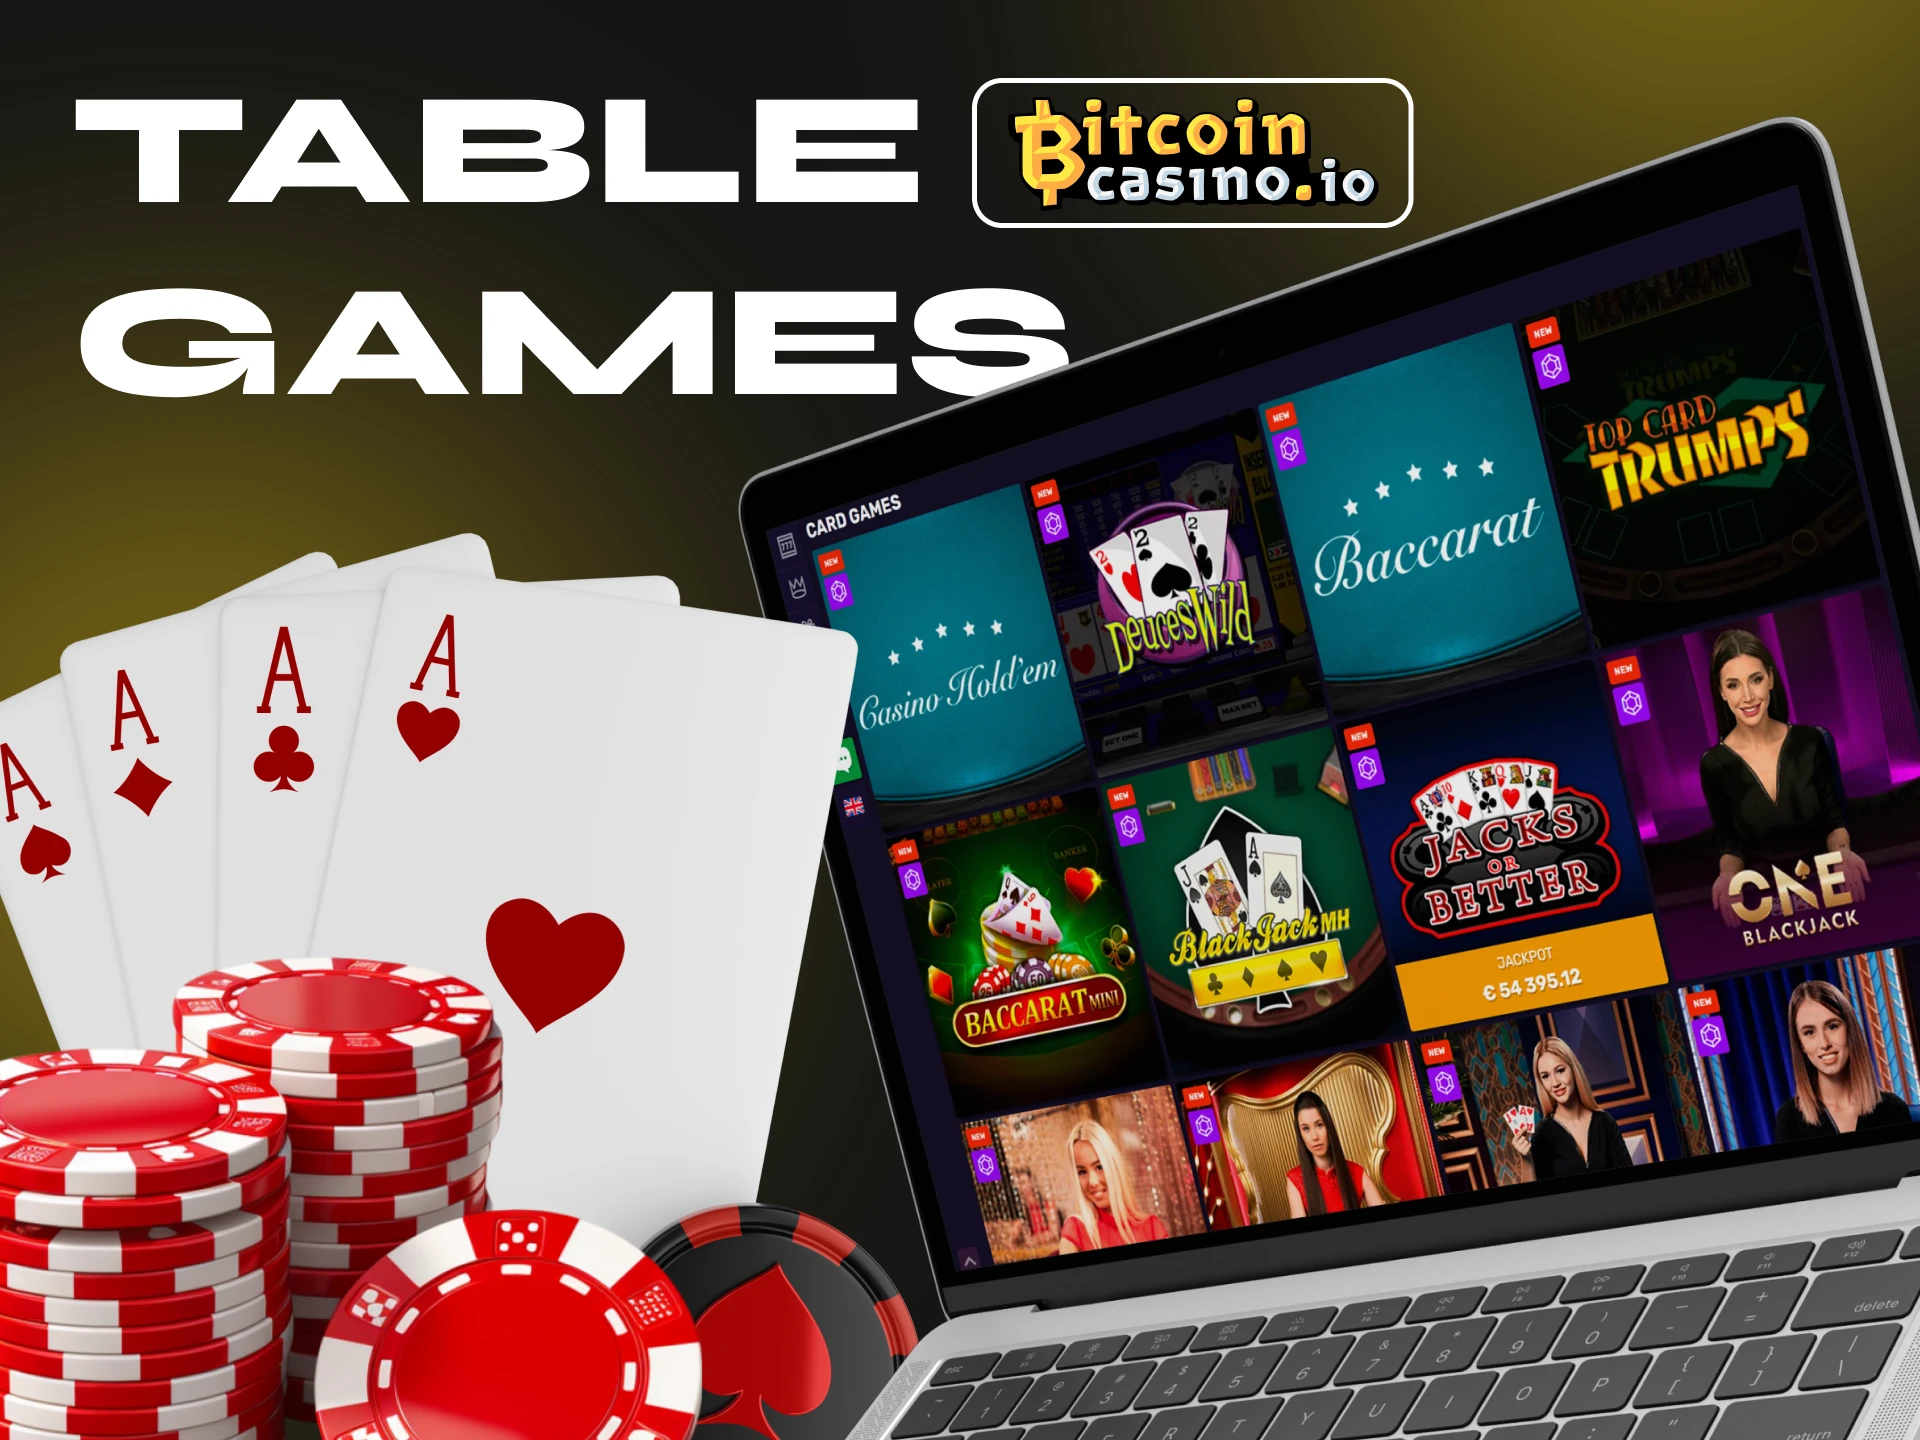 At Bitcoincasino you can find a variety of table games such as baccarat, poker, blackjack, etc.